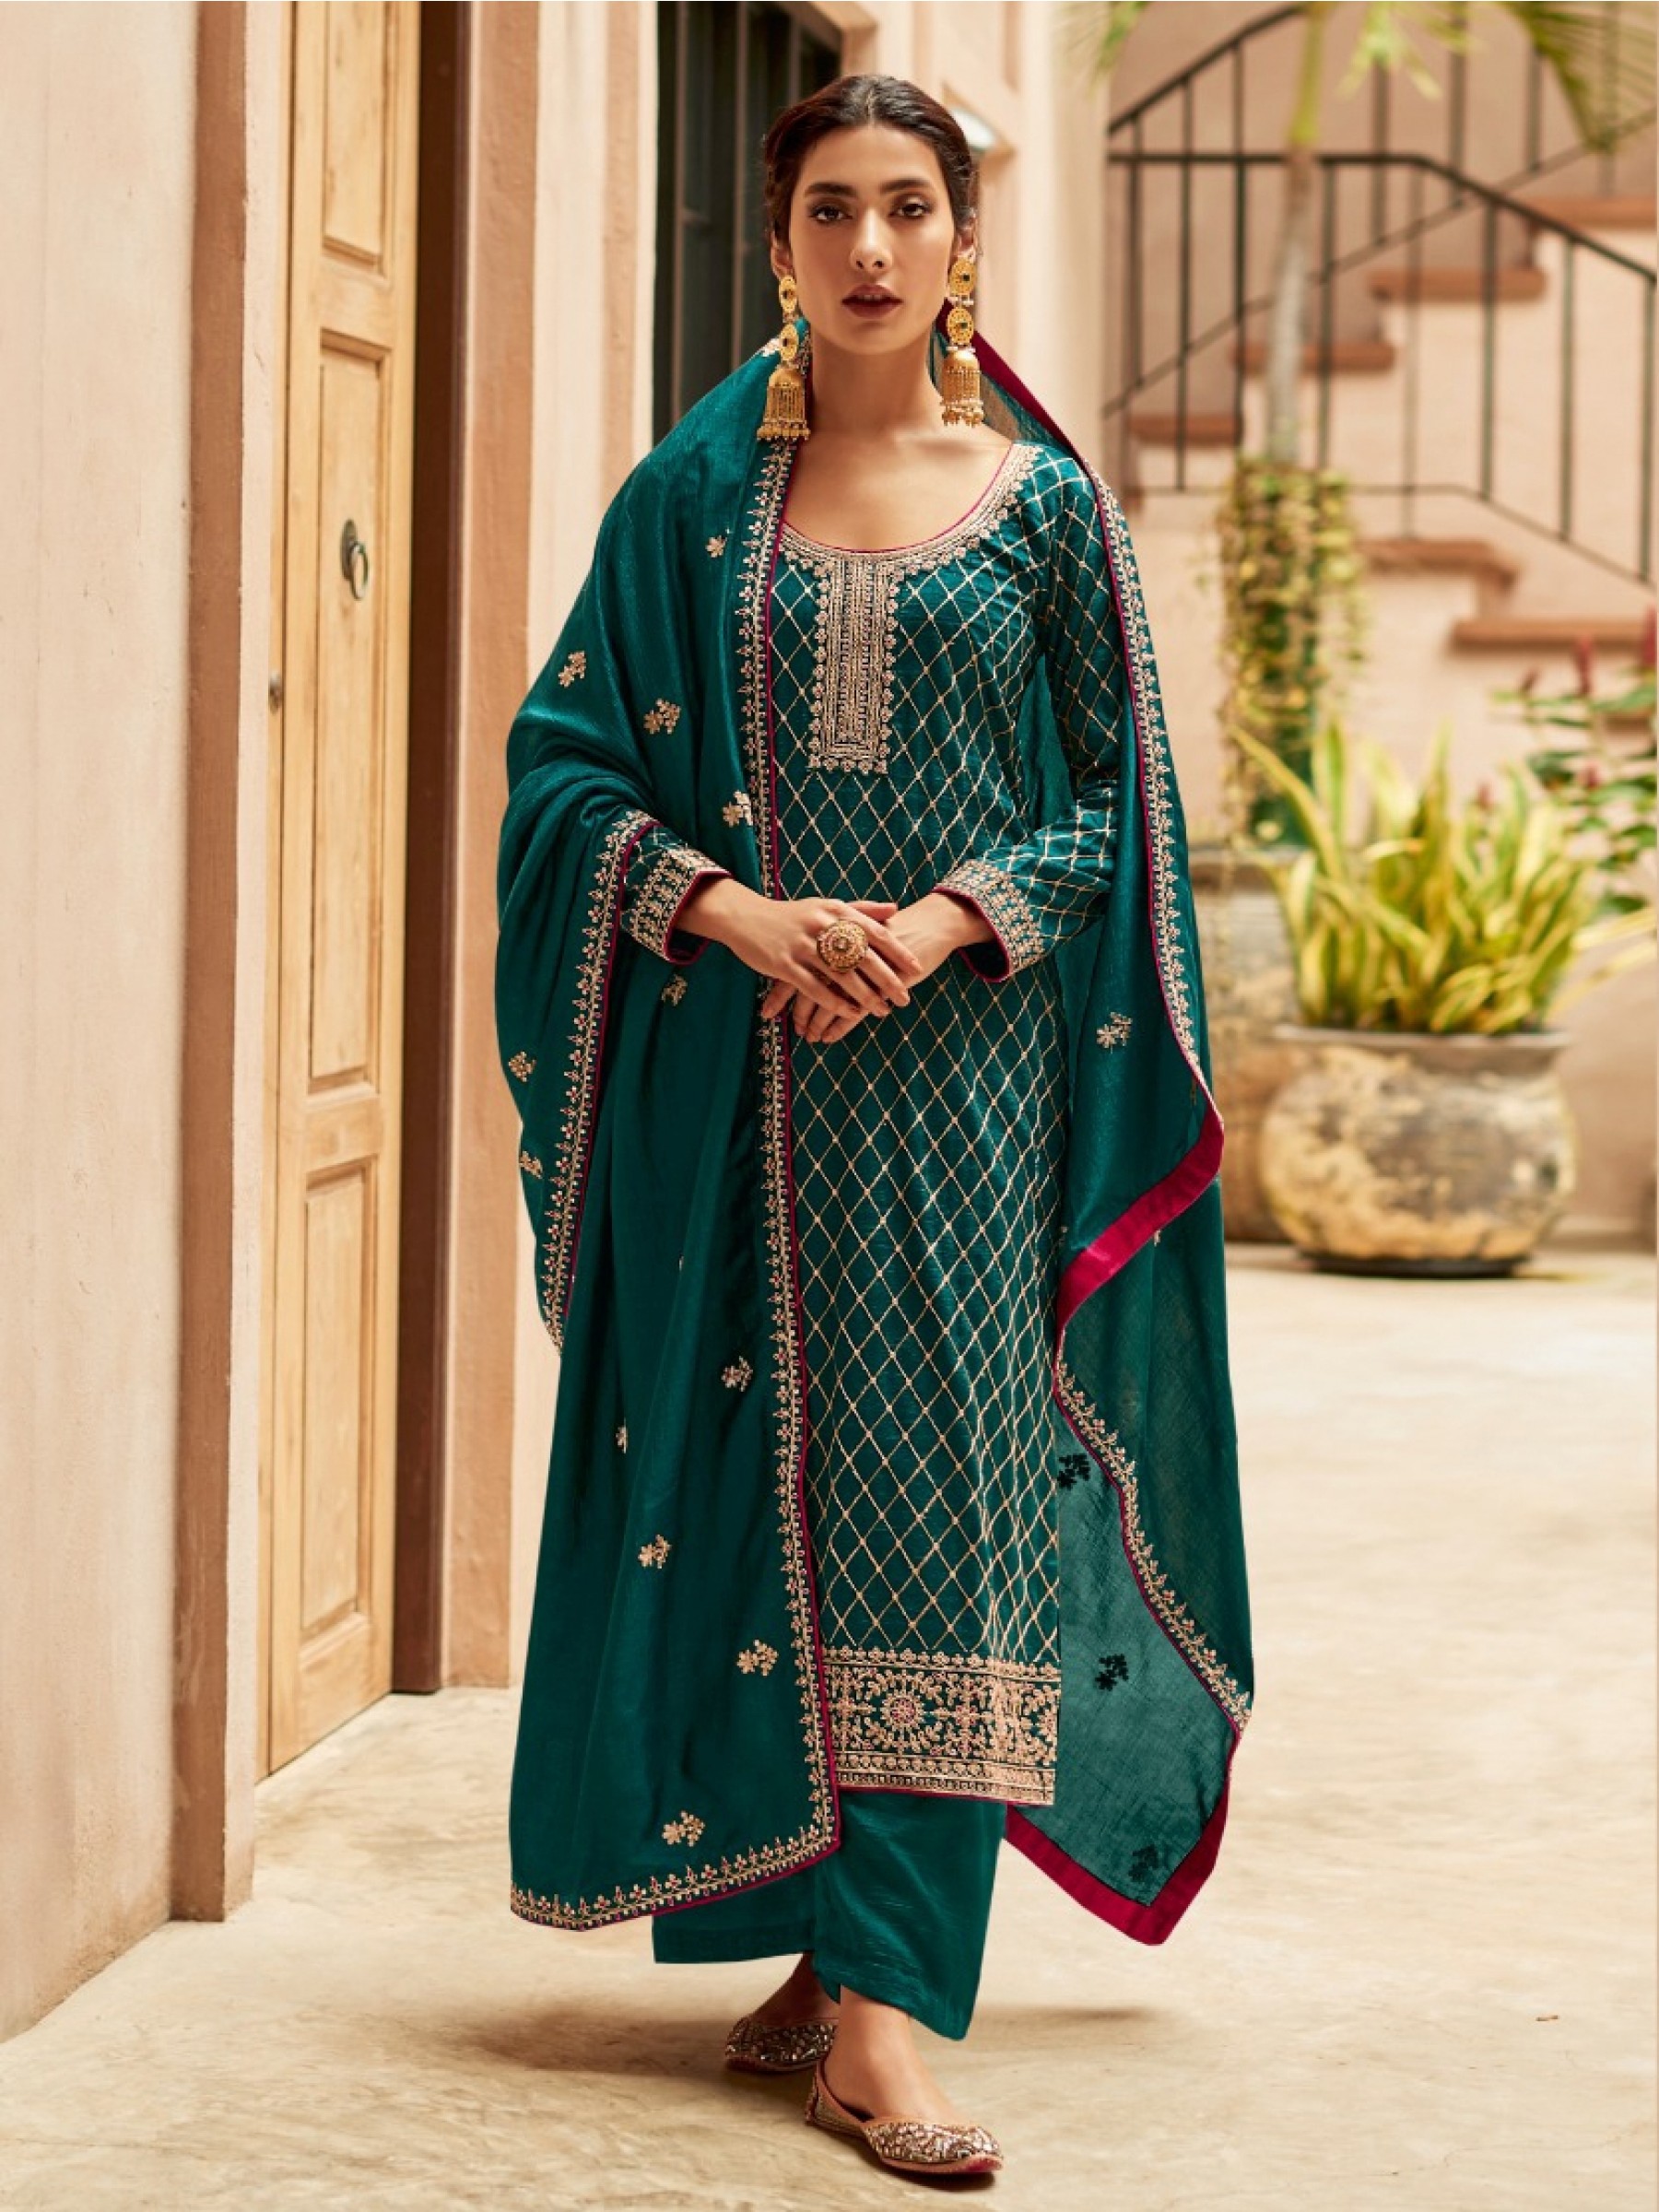 Heritage Silk Fabrics Party Wear Suit In Green Color With Embroidery Work